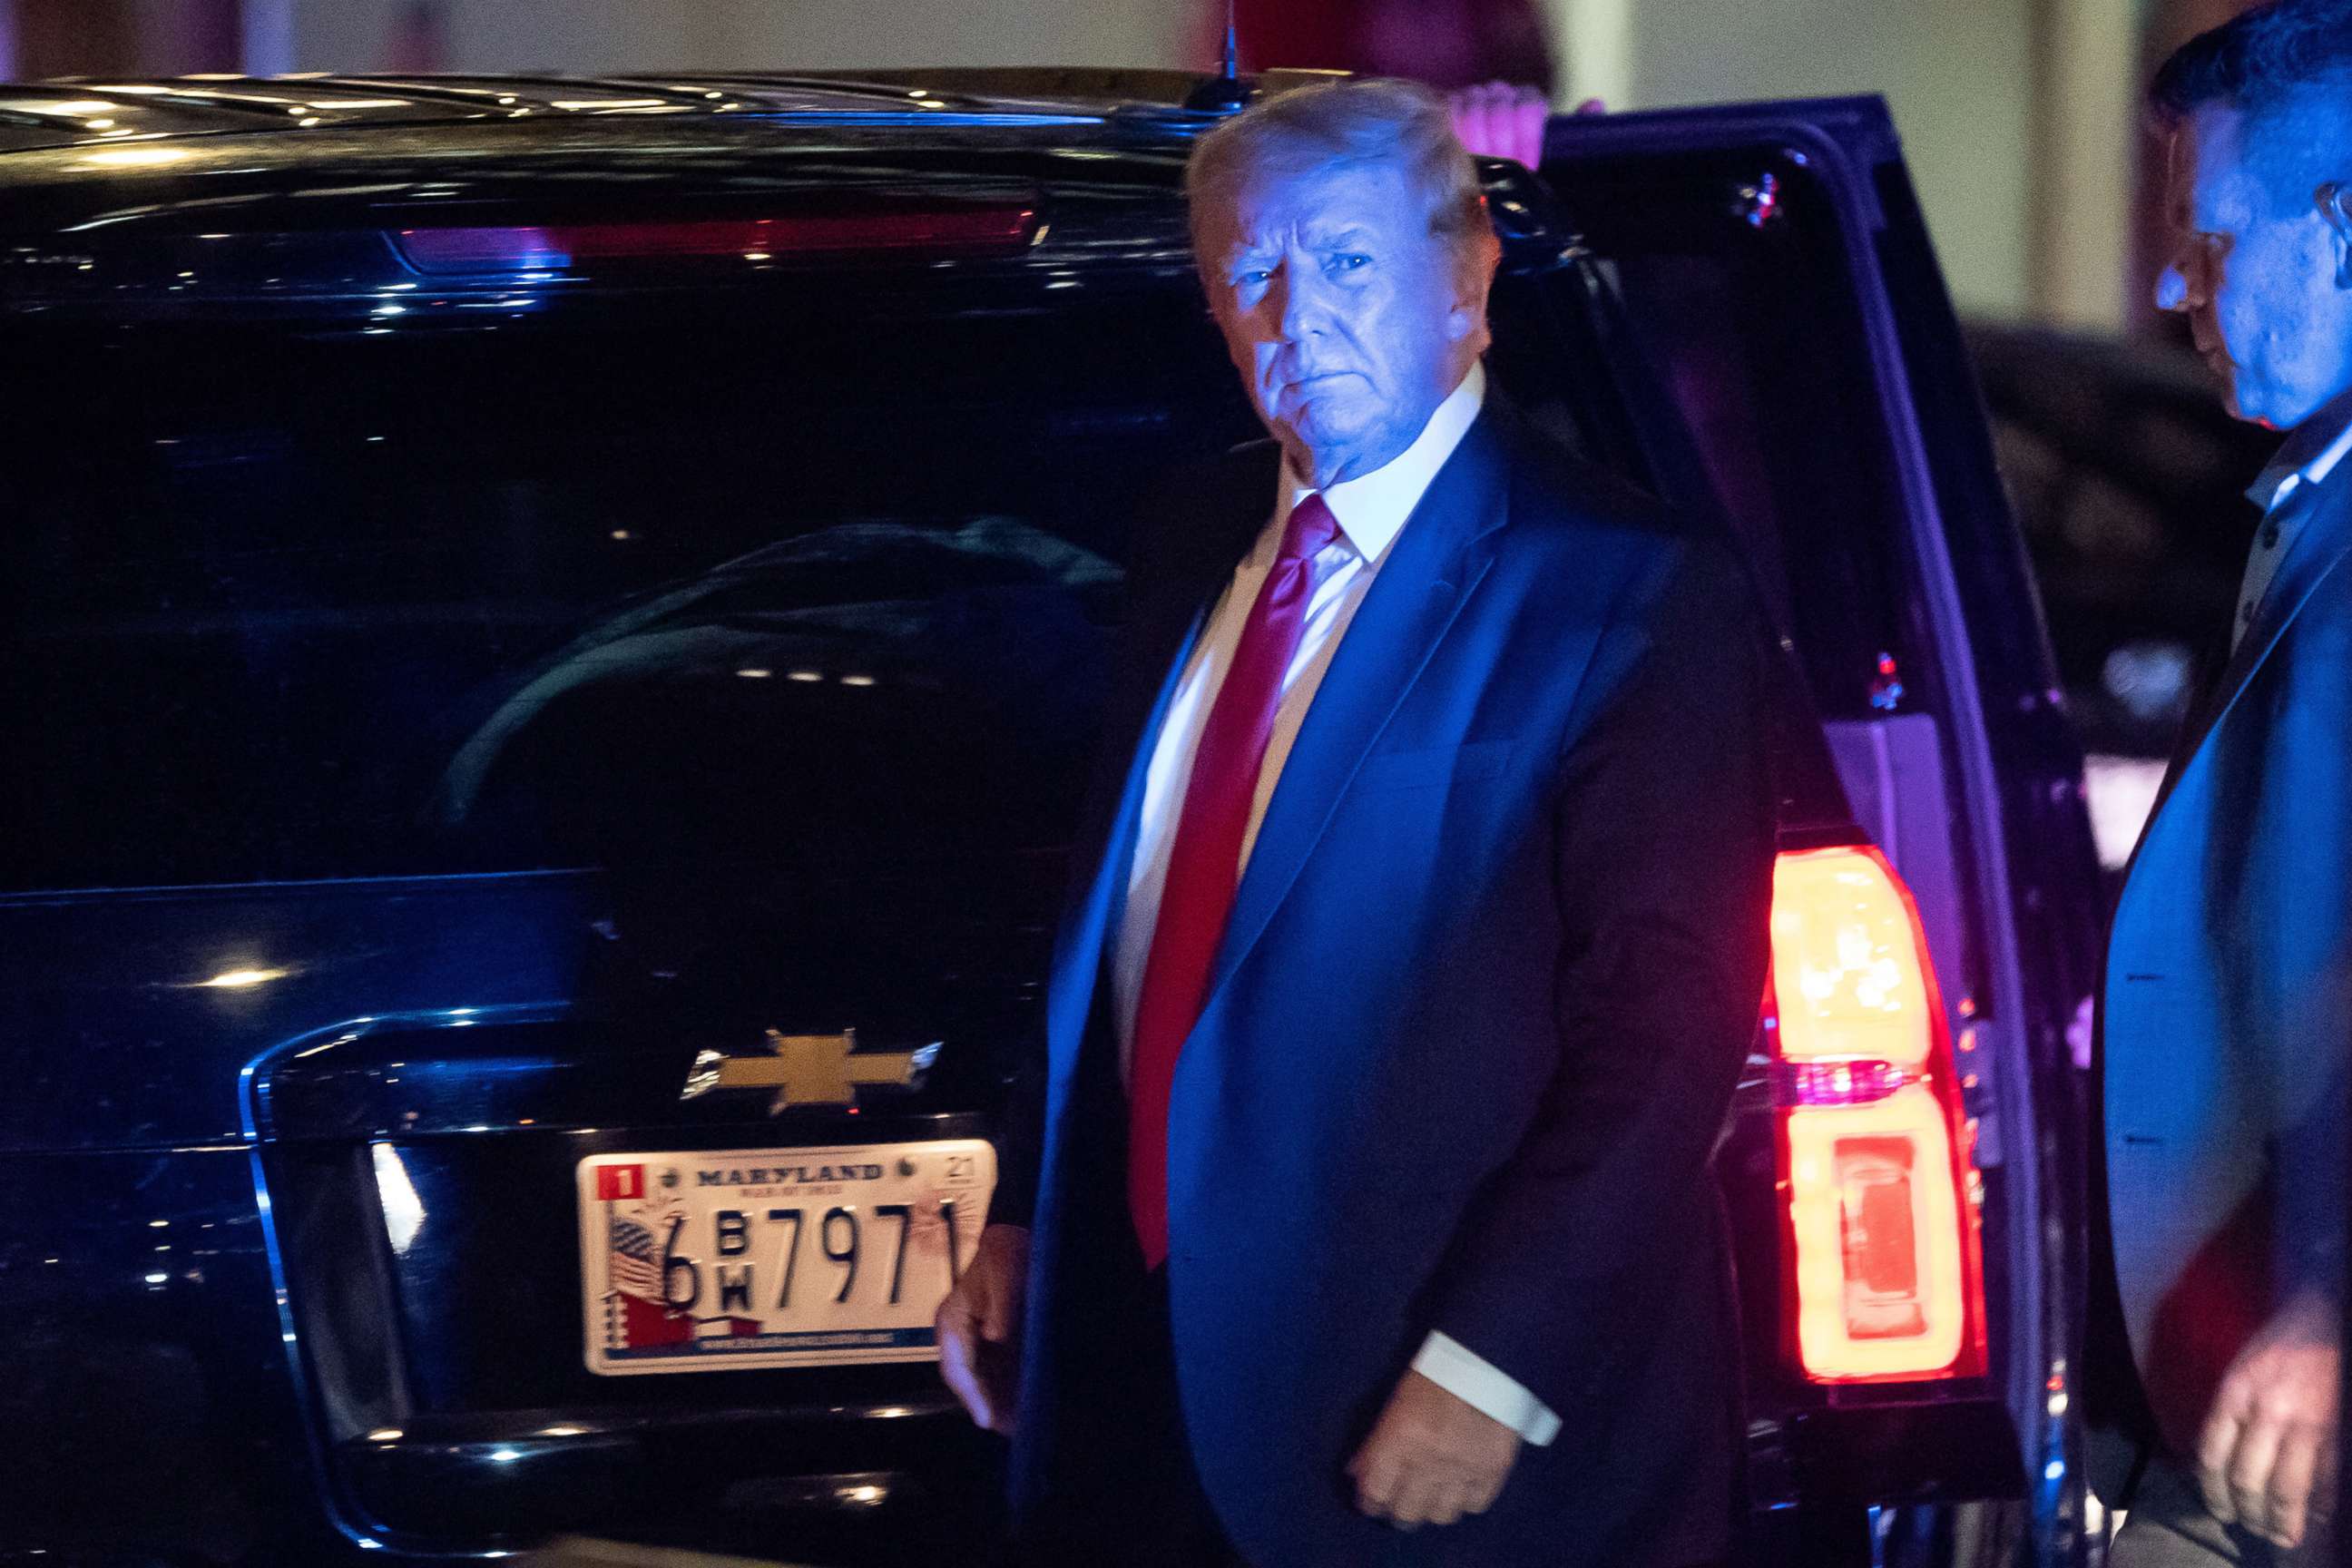 PHOTO: Former President Donald Trump arrives at Trump Tower in New York City, the day after FBI agents raided his Mar-a-Lago Palm Beach home, Aug. 9, 2022.